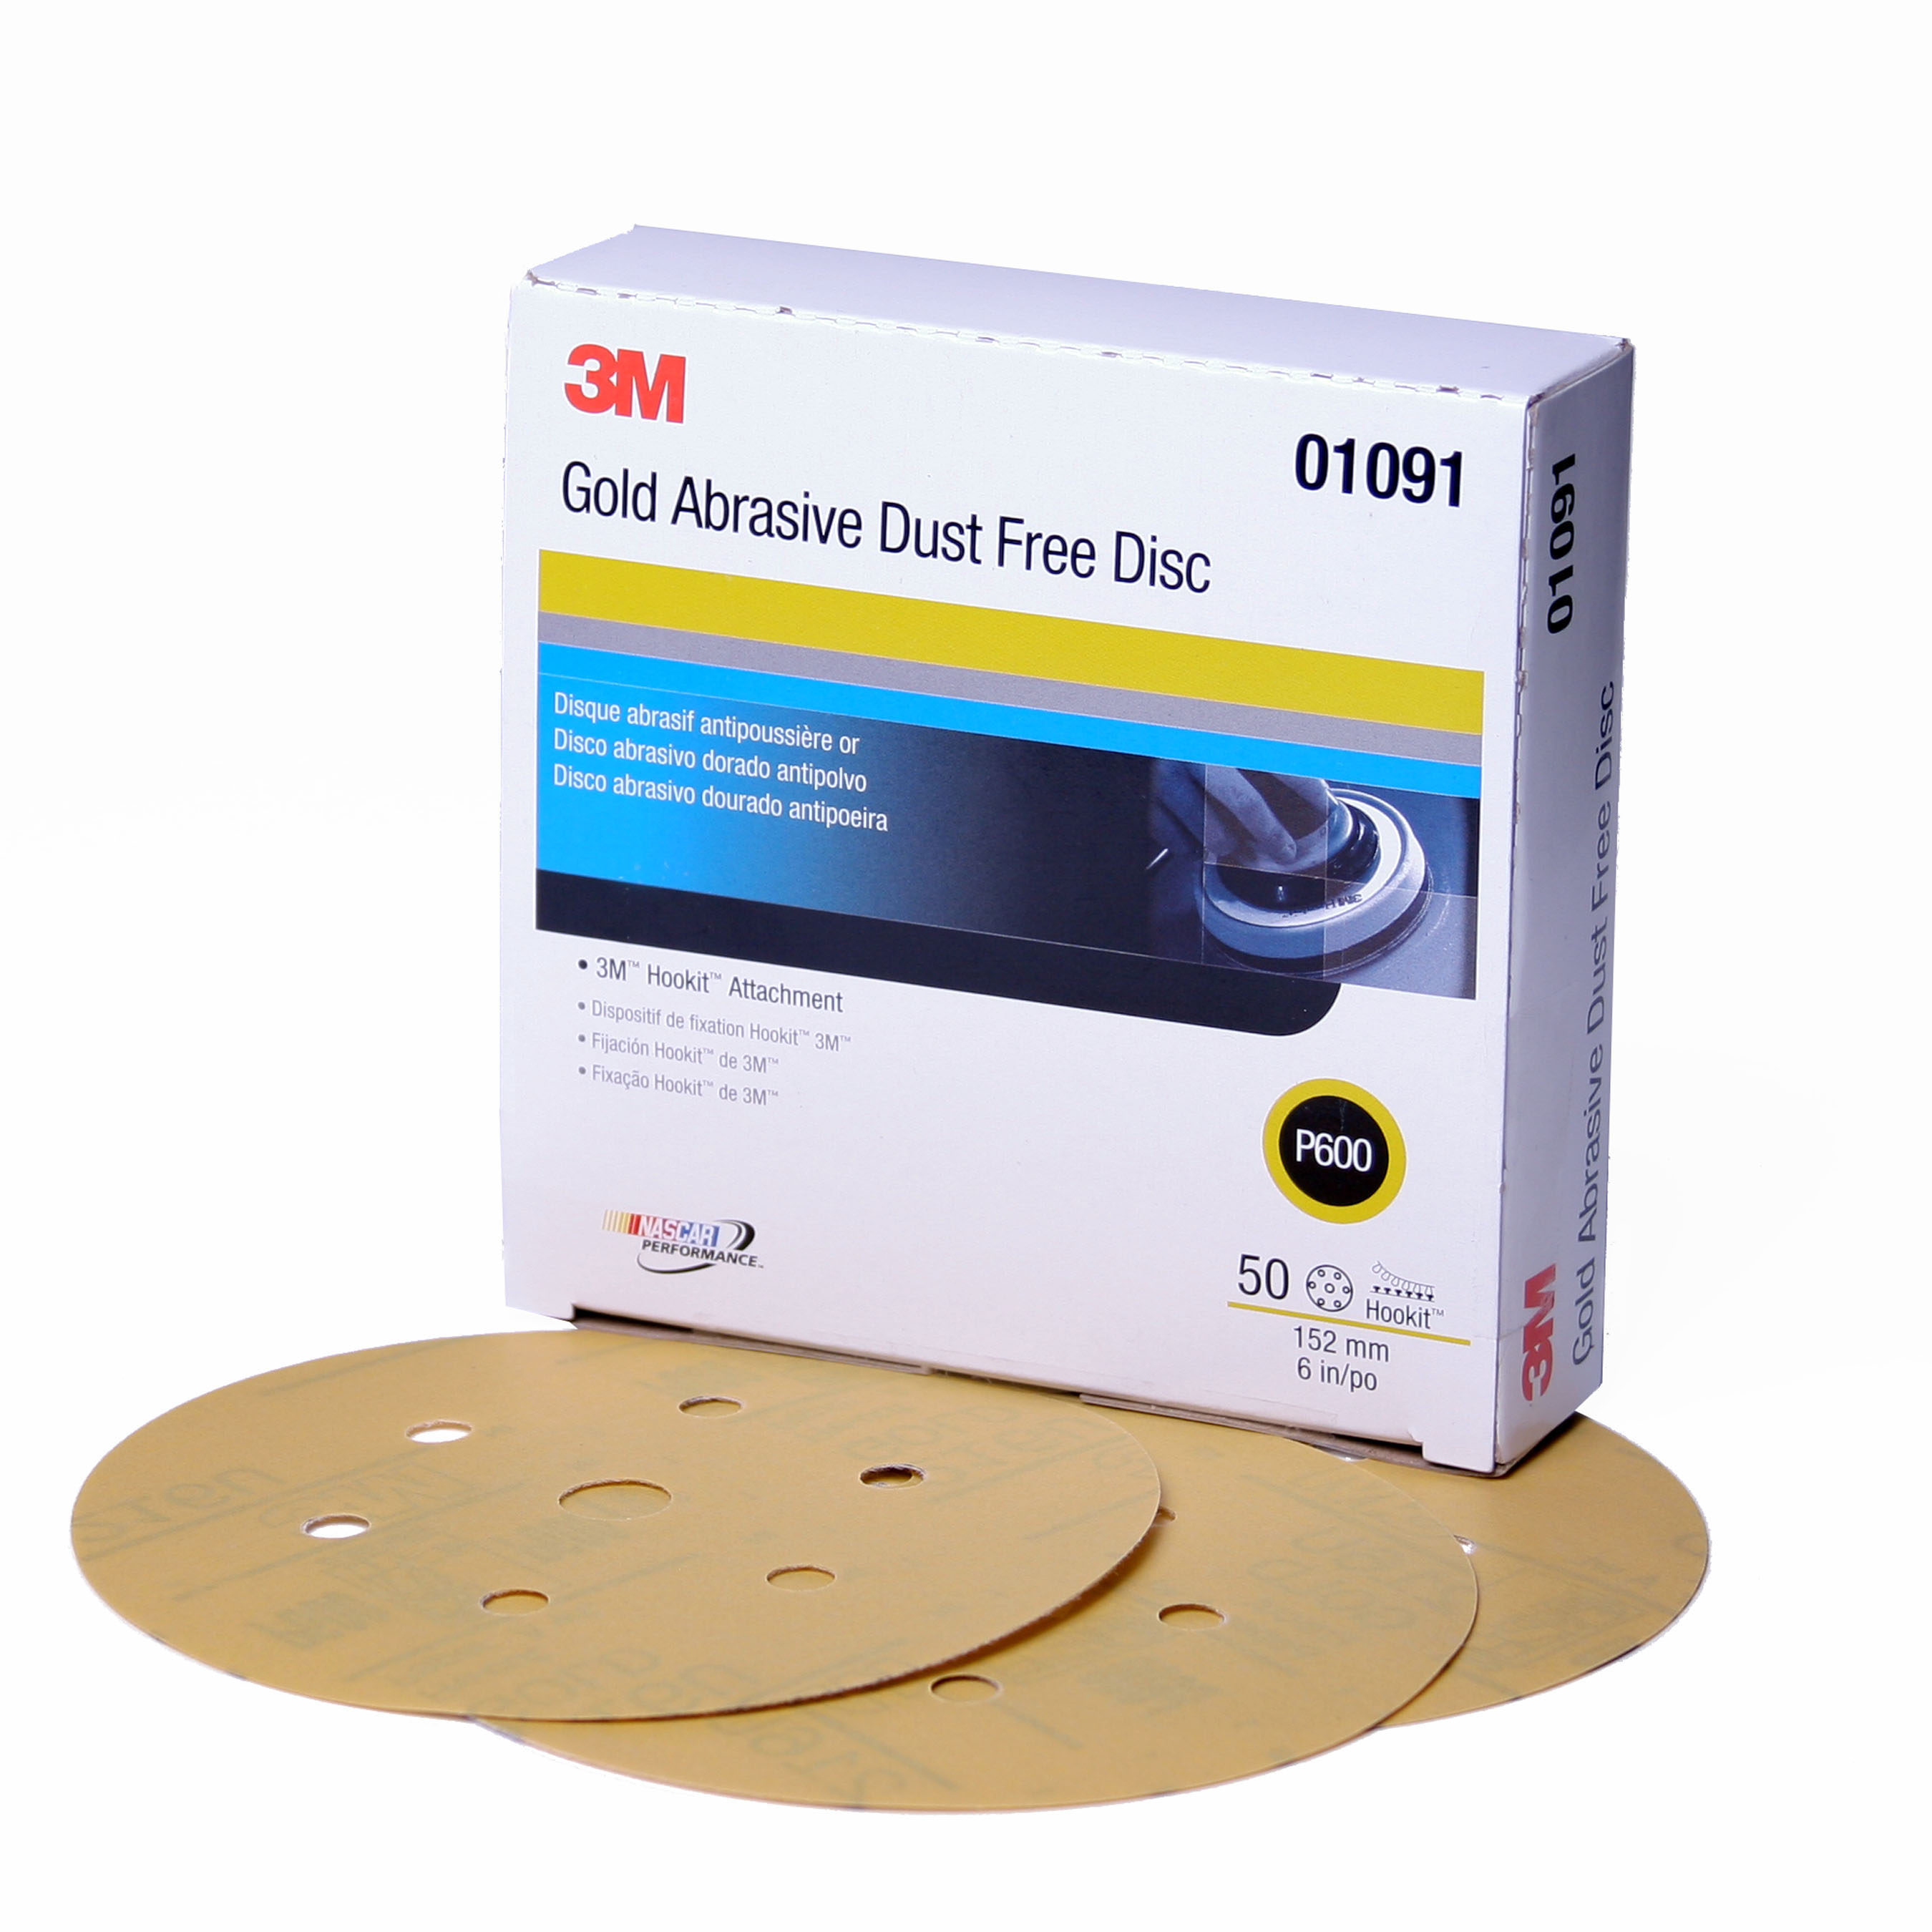 3M™ Rearview Mirror Adhesive 08752